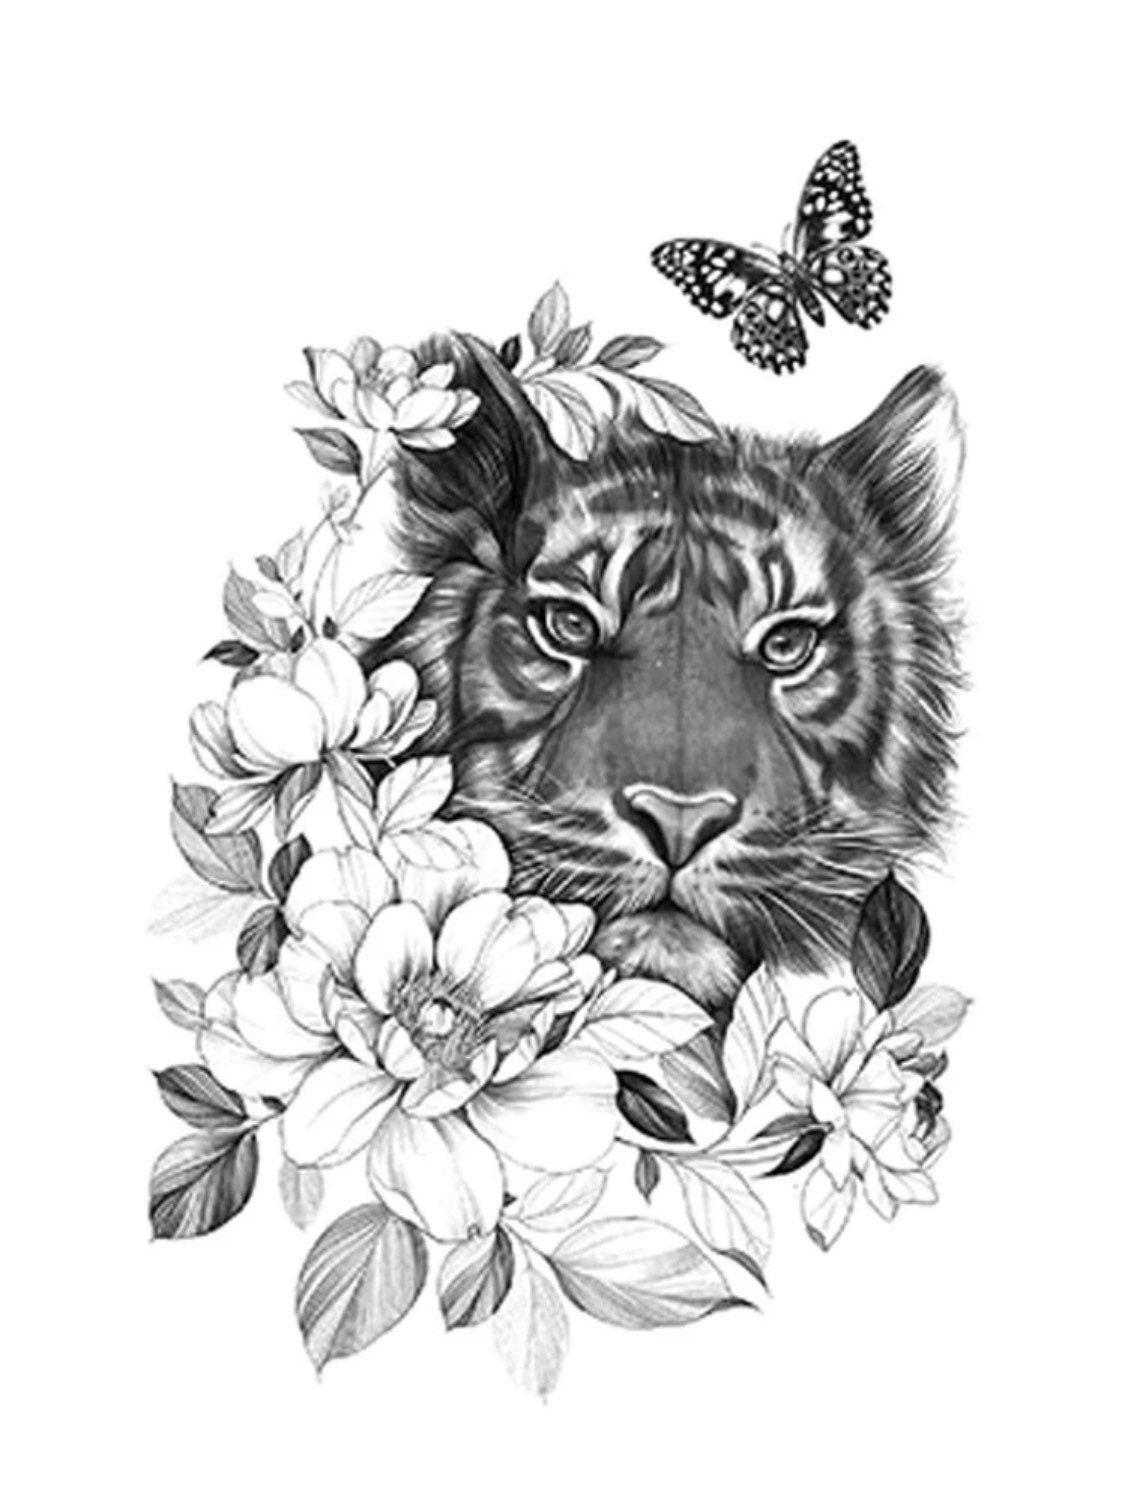 womens tiger tattoo with flowers